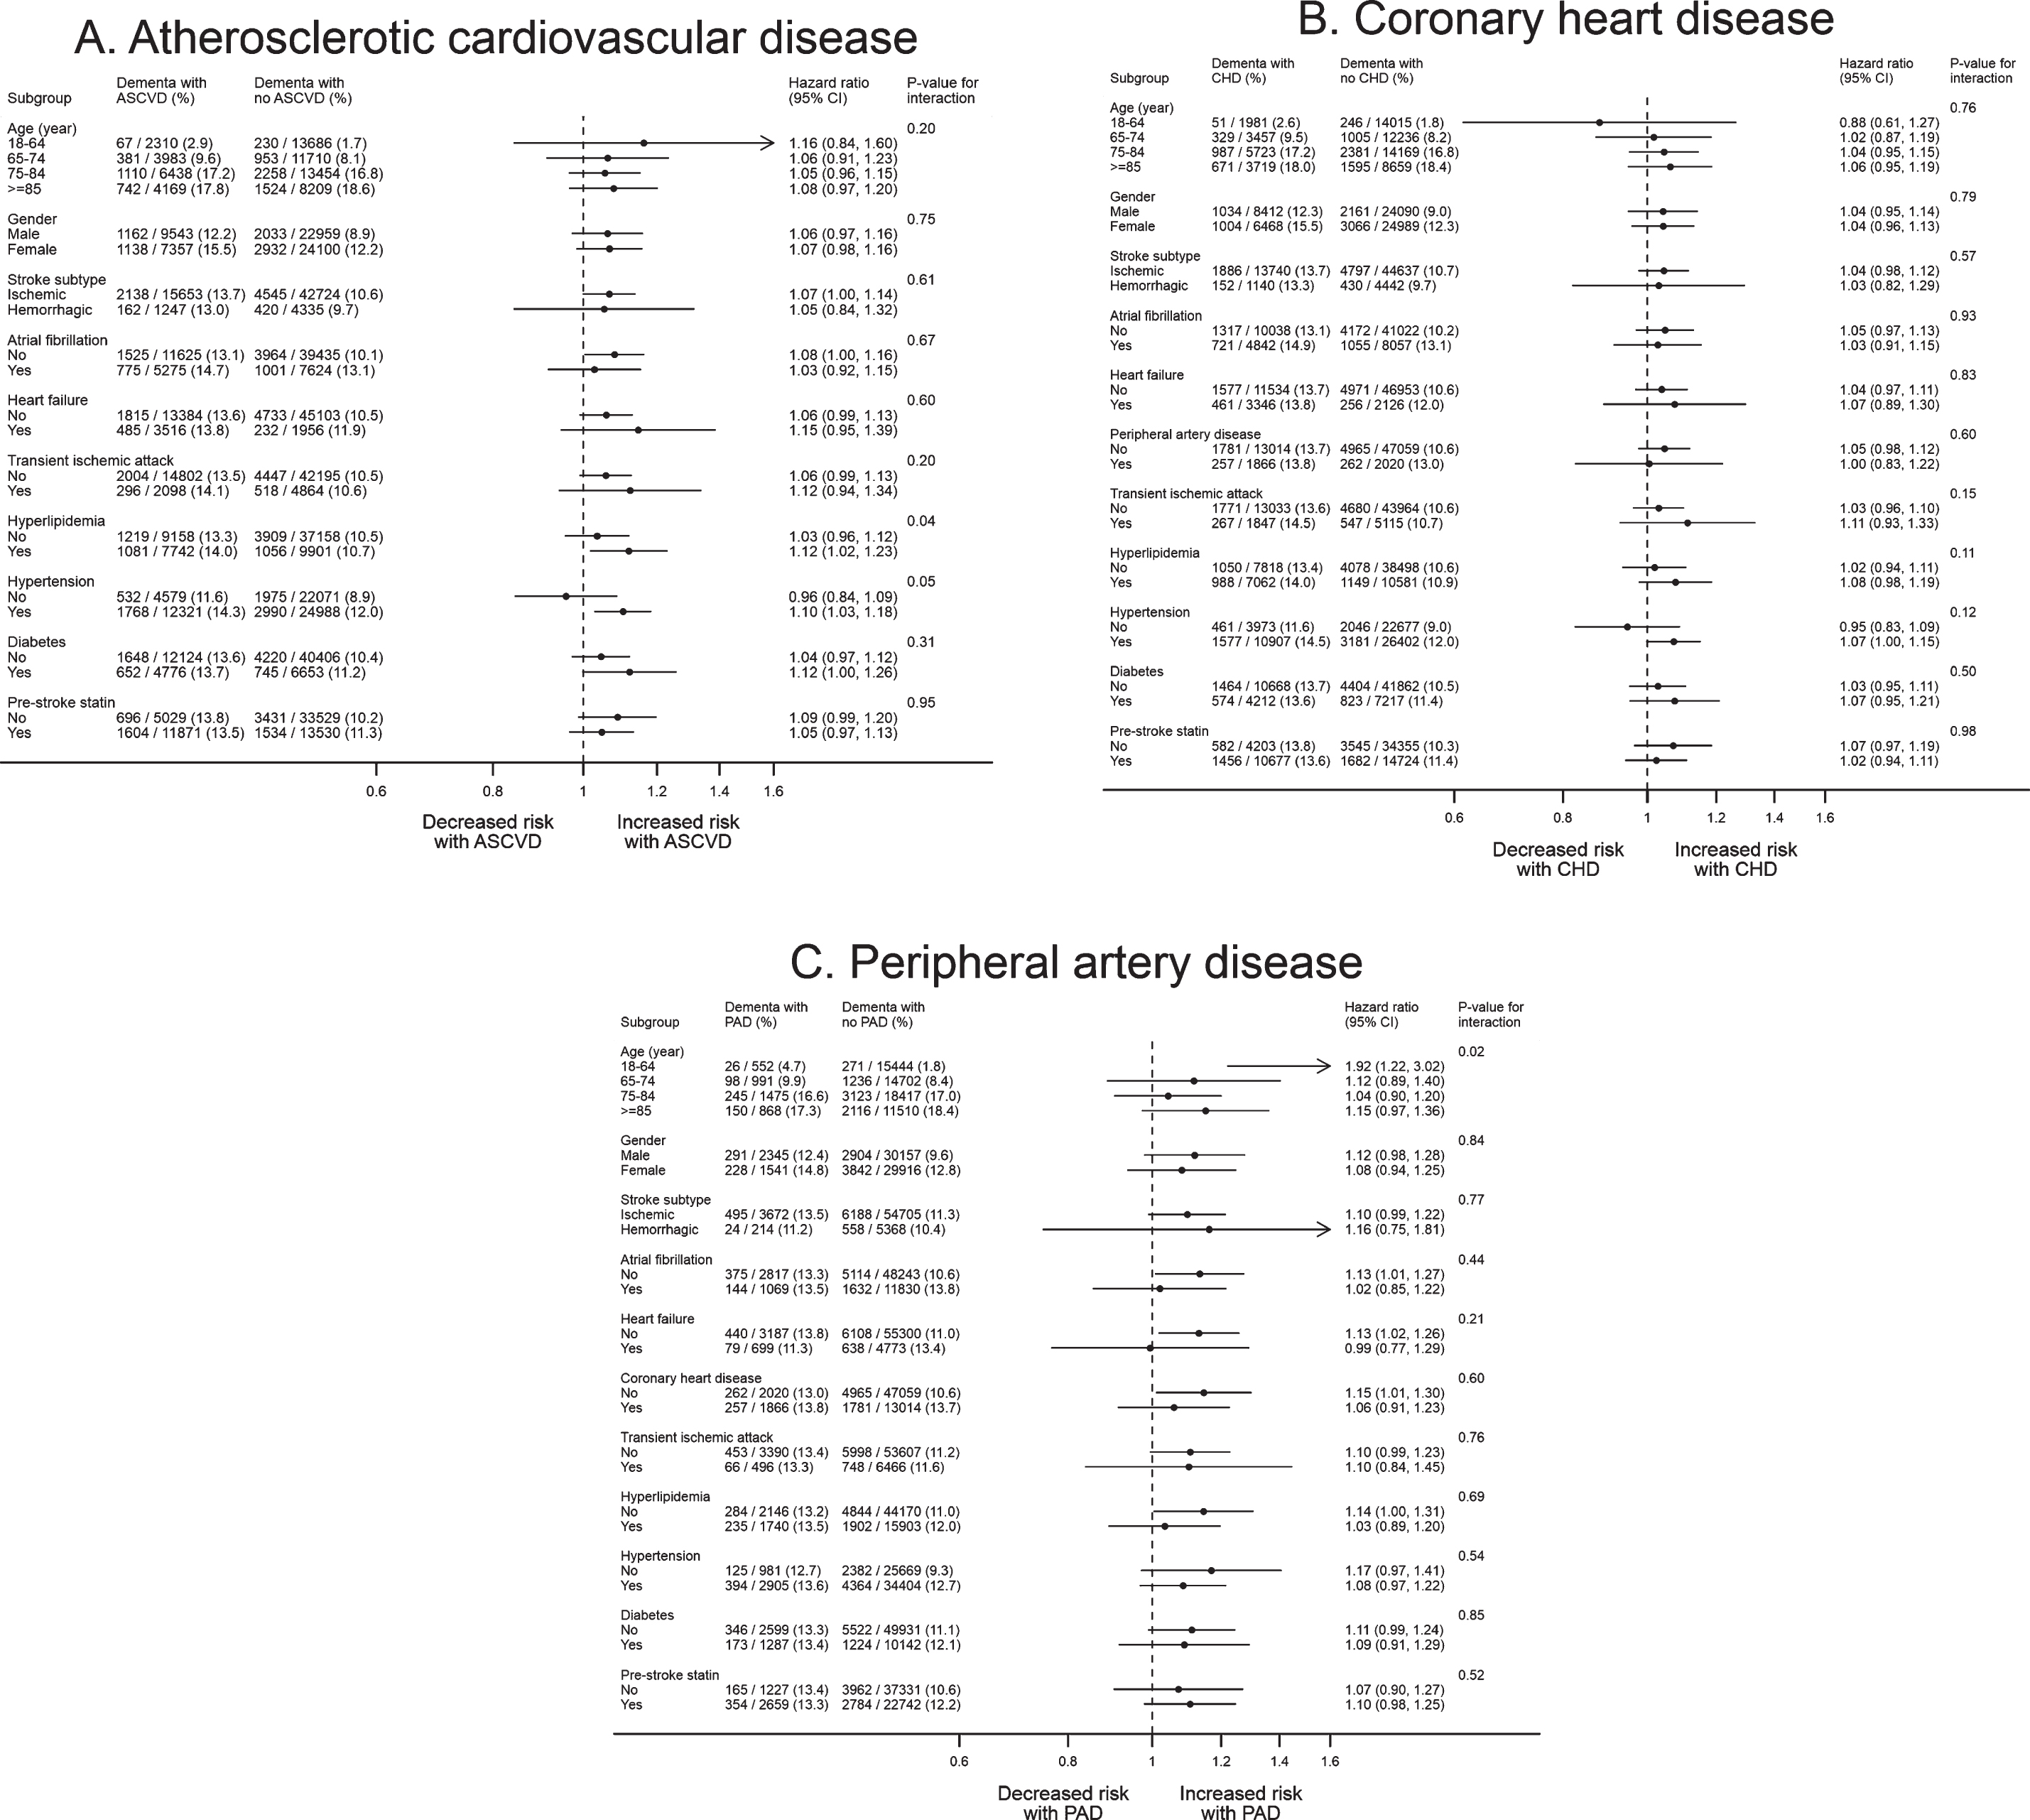 Subgroup analysis for the association of atherosclerotic cardiovascular disease with dementia after stroke. A total of 57,902 patients with complete baseline data were included. All the models were adjusted for age, gender, IMD, smoking, BMI, stroke subtype, atrial fibrillation, alcohol problem, anxiety, rheumatoid arthritis, asthma, chronic obstructive pulmonary disease, depression, diabetes, epilepsy, hyperlipidemia, heart failure, hypertension, Parkinson’s disease, transient ischemic attack, consultation, statins, other lipid-lowering drugs, anticoagulant, antiplatelet, antihypertensive drugs, and antidiabetic drugs. The CHD and PAD models additionally adjusted for PAD and CHD, respectively. ASCVD, atherosclerotic cardiovascular disease; BMI, body mass index; CHD, coronary heart disease; IMD, Index of Multiple Deprivation; PAD, peripheral artery disease.